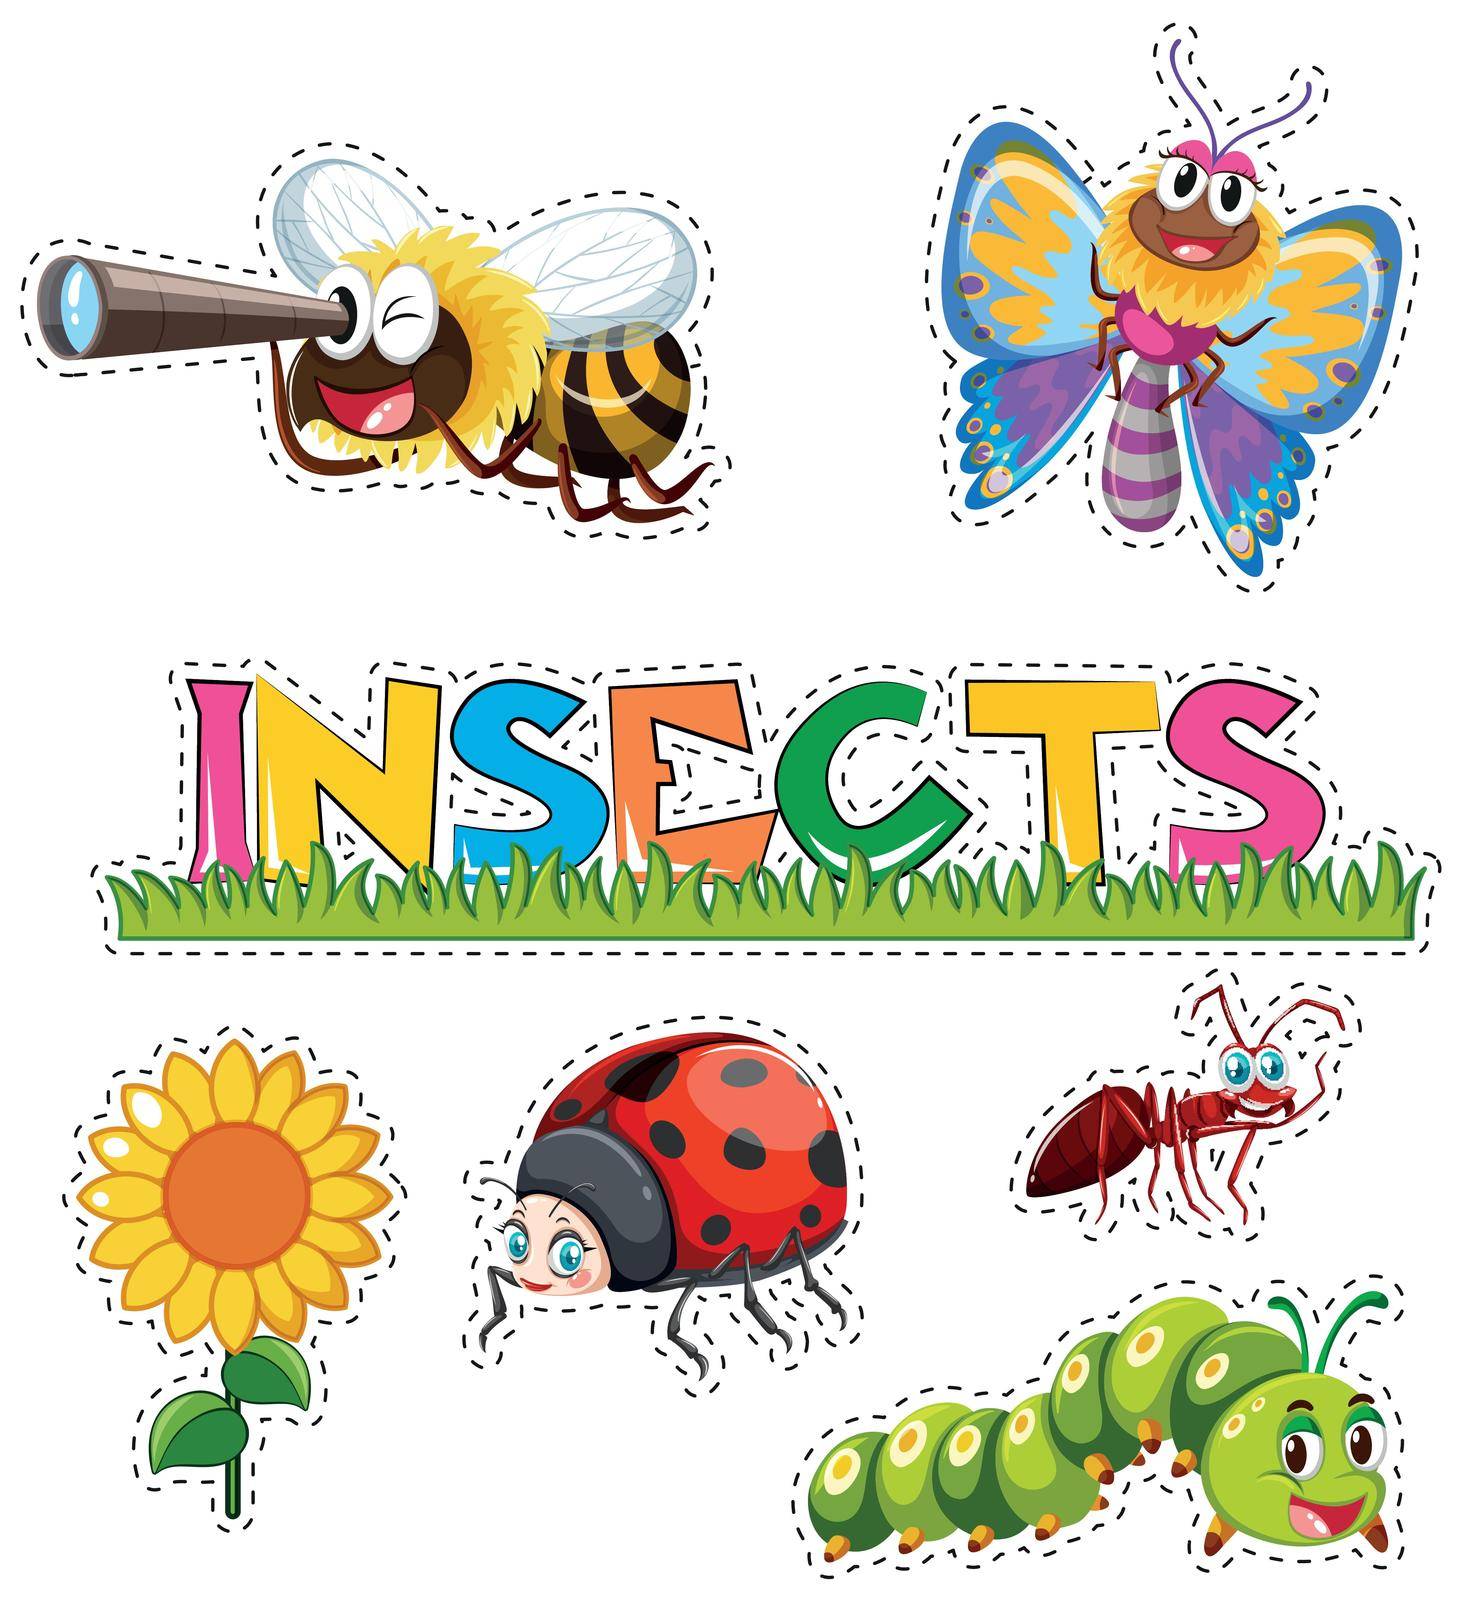 Many insects in sticker design illustration